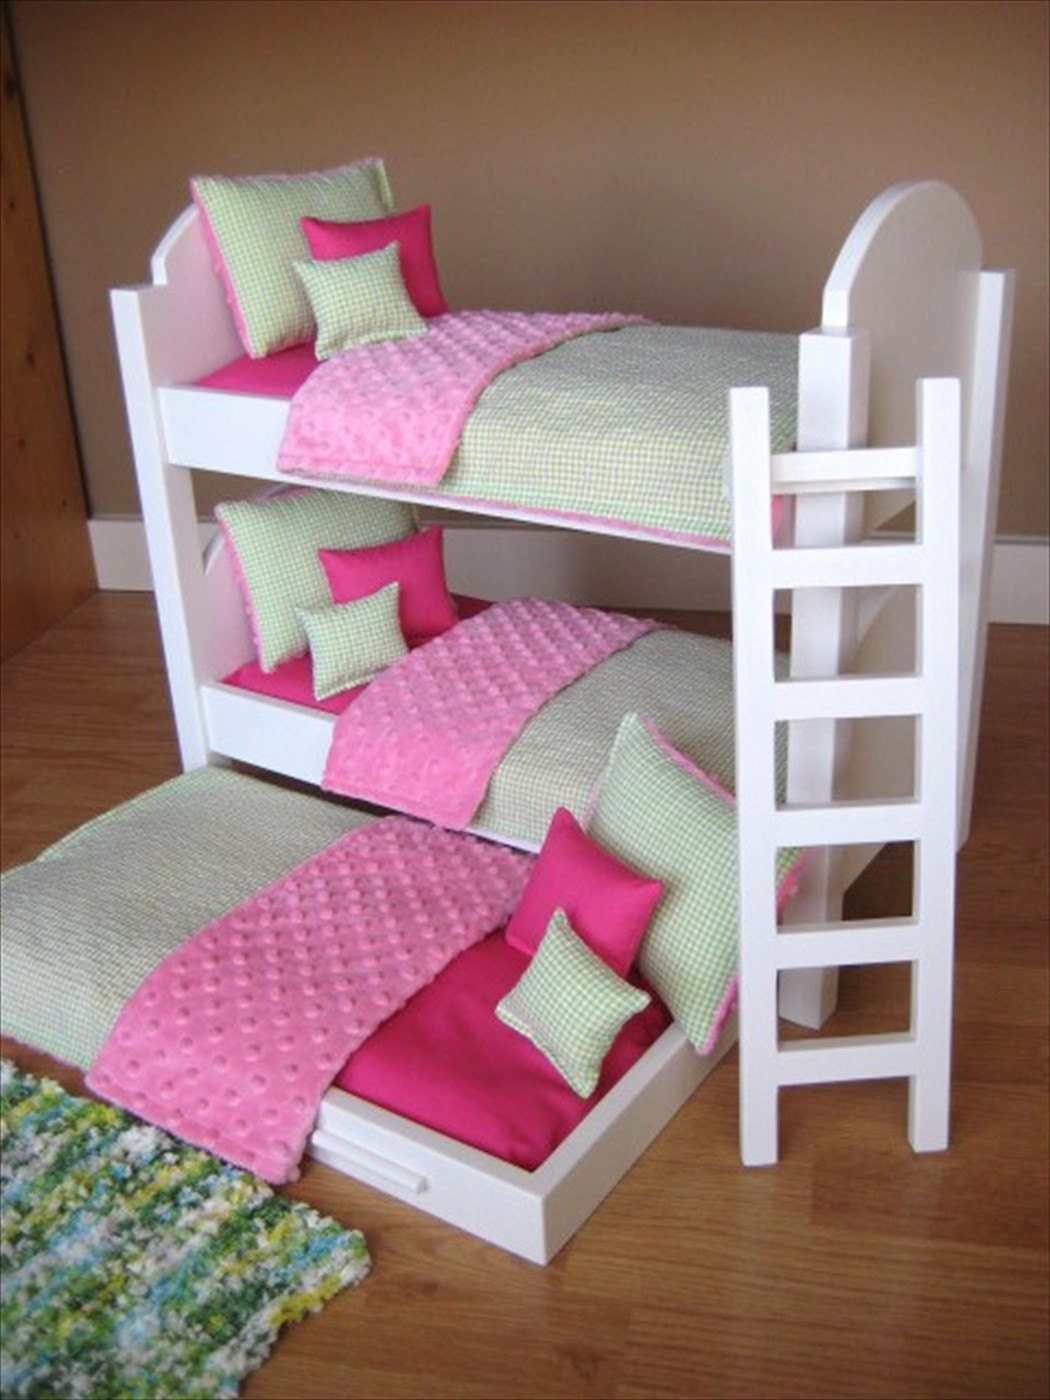 Triple Bunk Bed For American Girl Dolls Reserved By Solarwood7222 26910 Hot Sex Picture